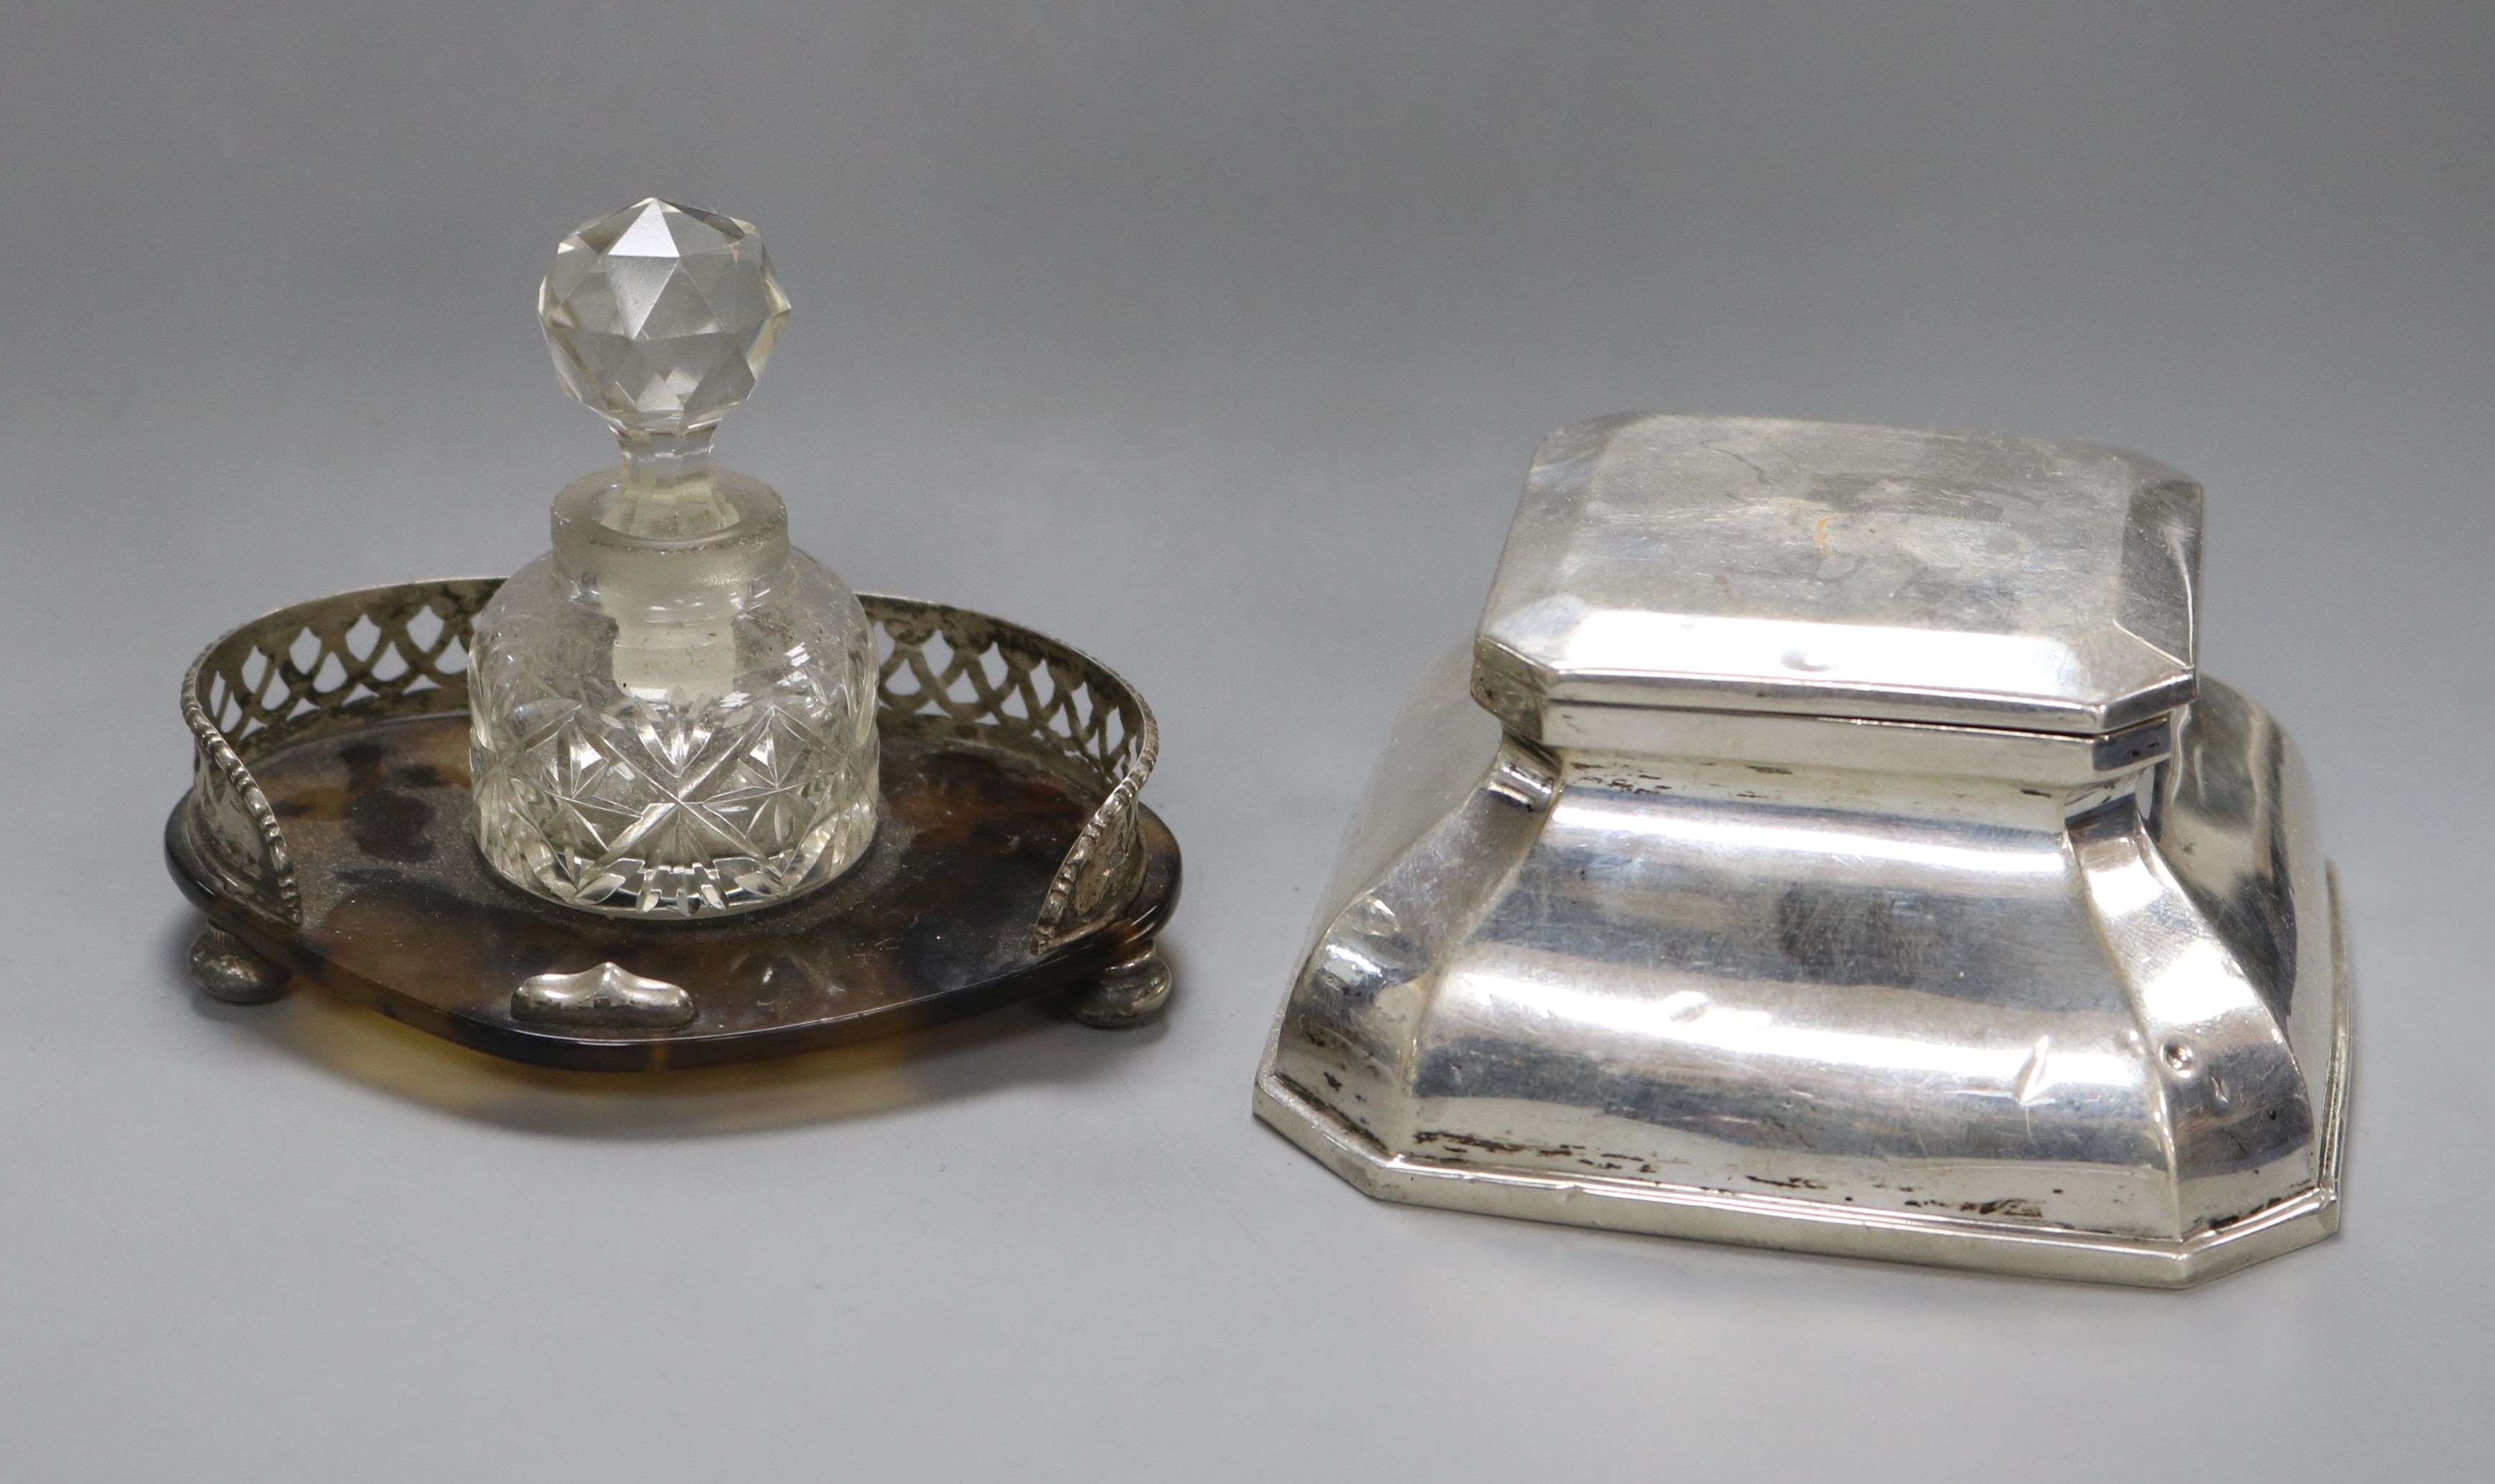 A silver mounted inkwell and a silver mounted inkstand with glass bottle and stopper.